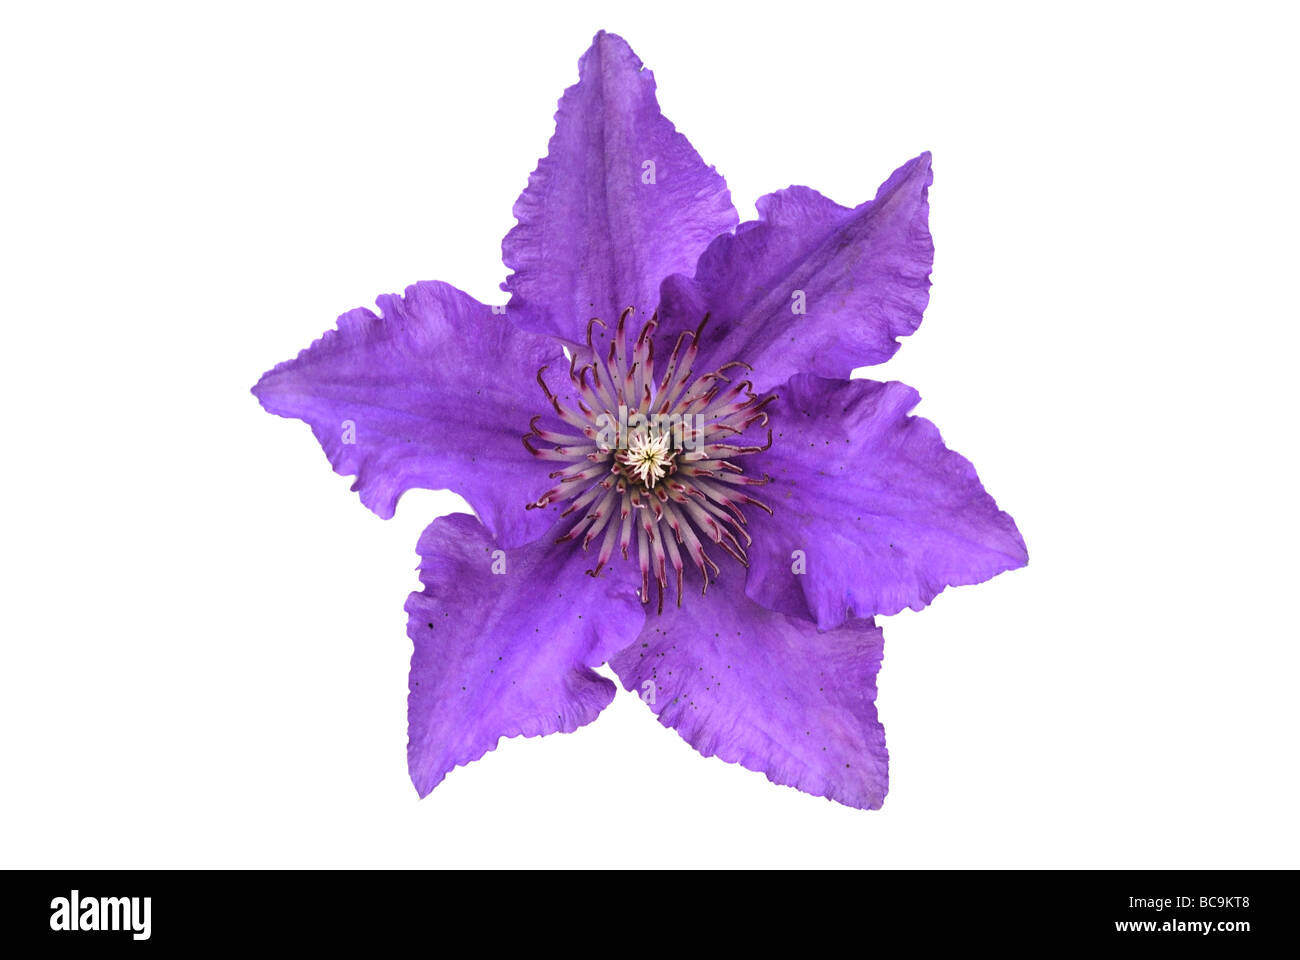 Blue clematis flower Stock Photo